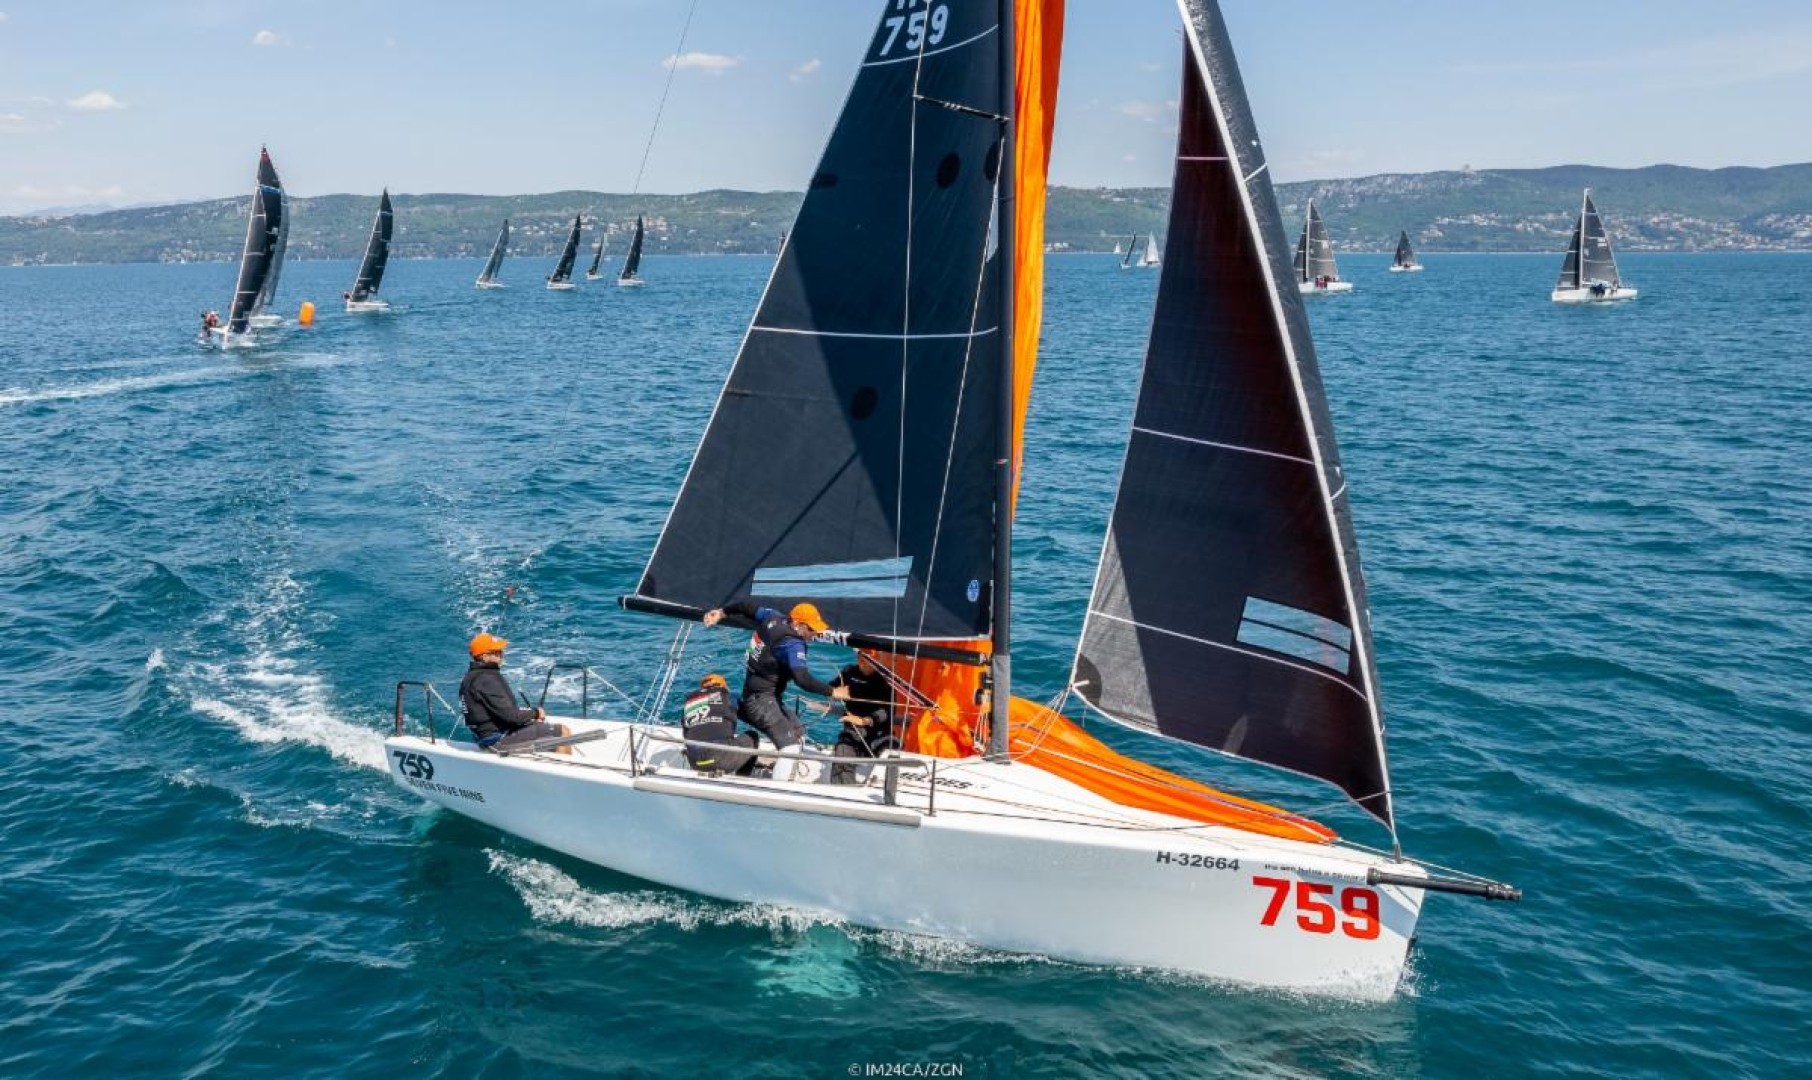 Corinthian team Seven Five Nine HUN759 of Akos Csolto with Balazs Tamai, Botond Weores and Mihaly Kasa onboard stood to the top of the overall podium of the European Sailing Series' event for the first time ever - Trieste, Italy
© IM24CA/Zerogradinord